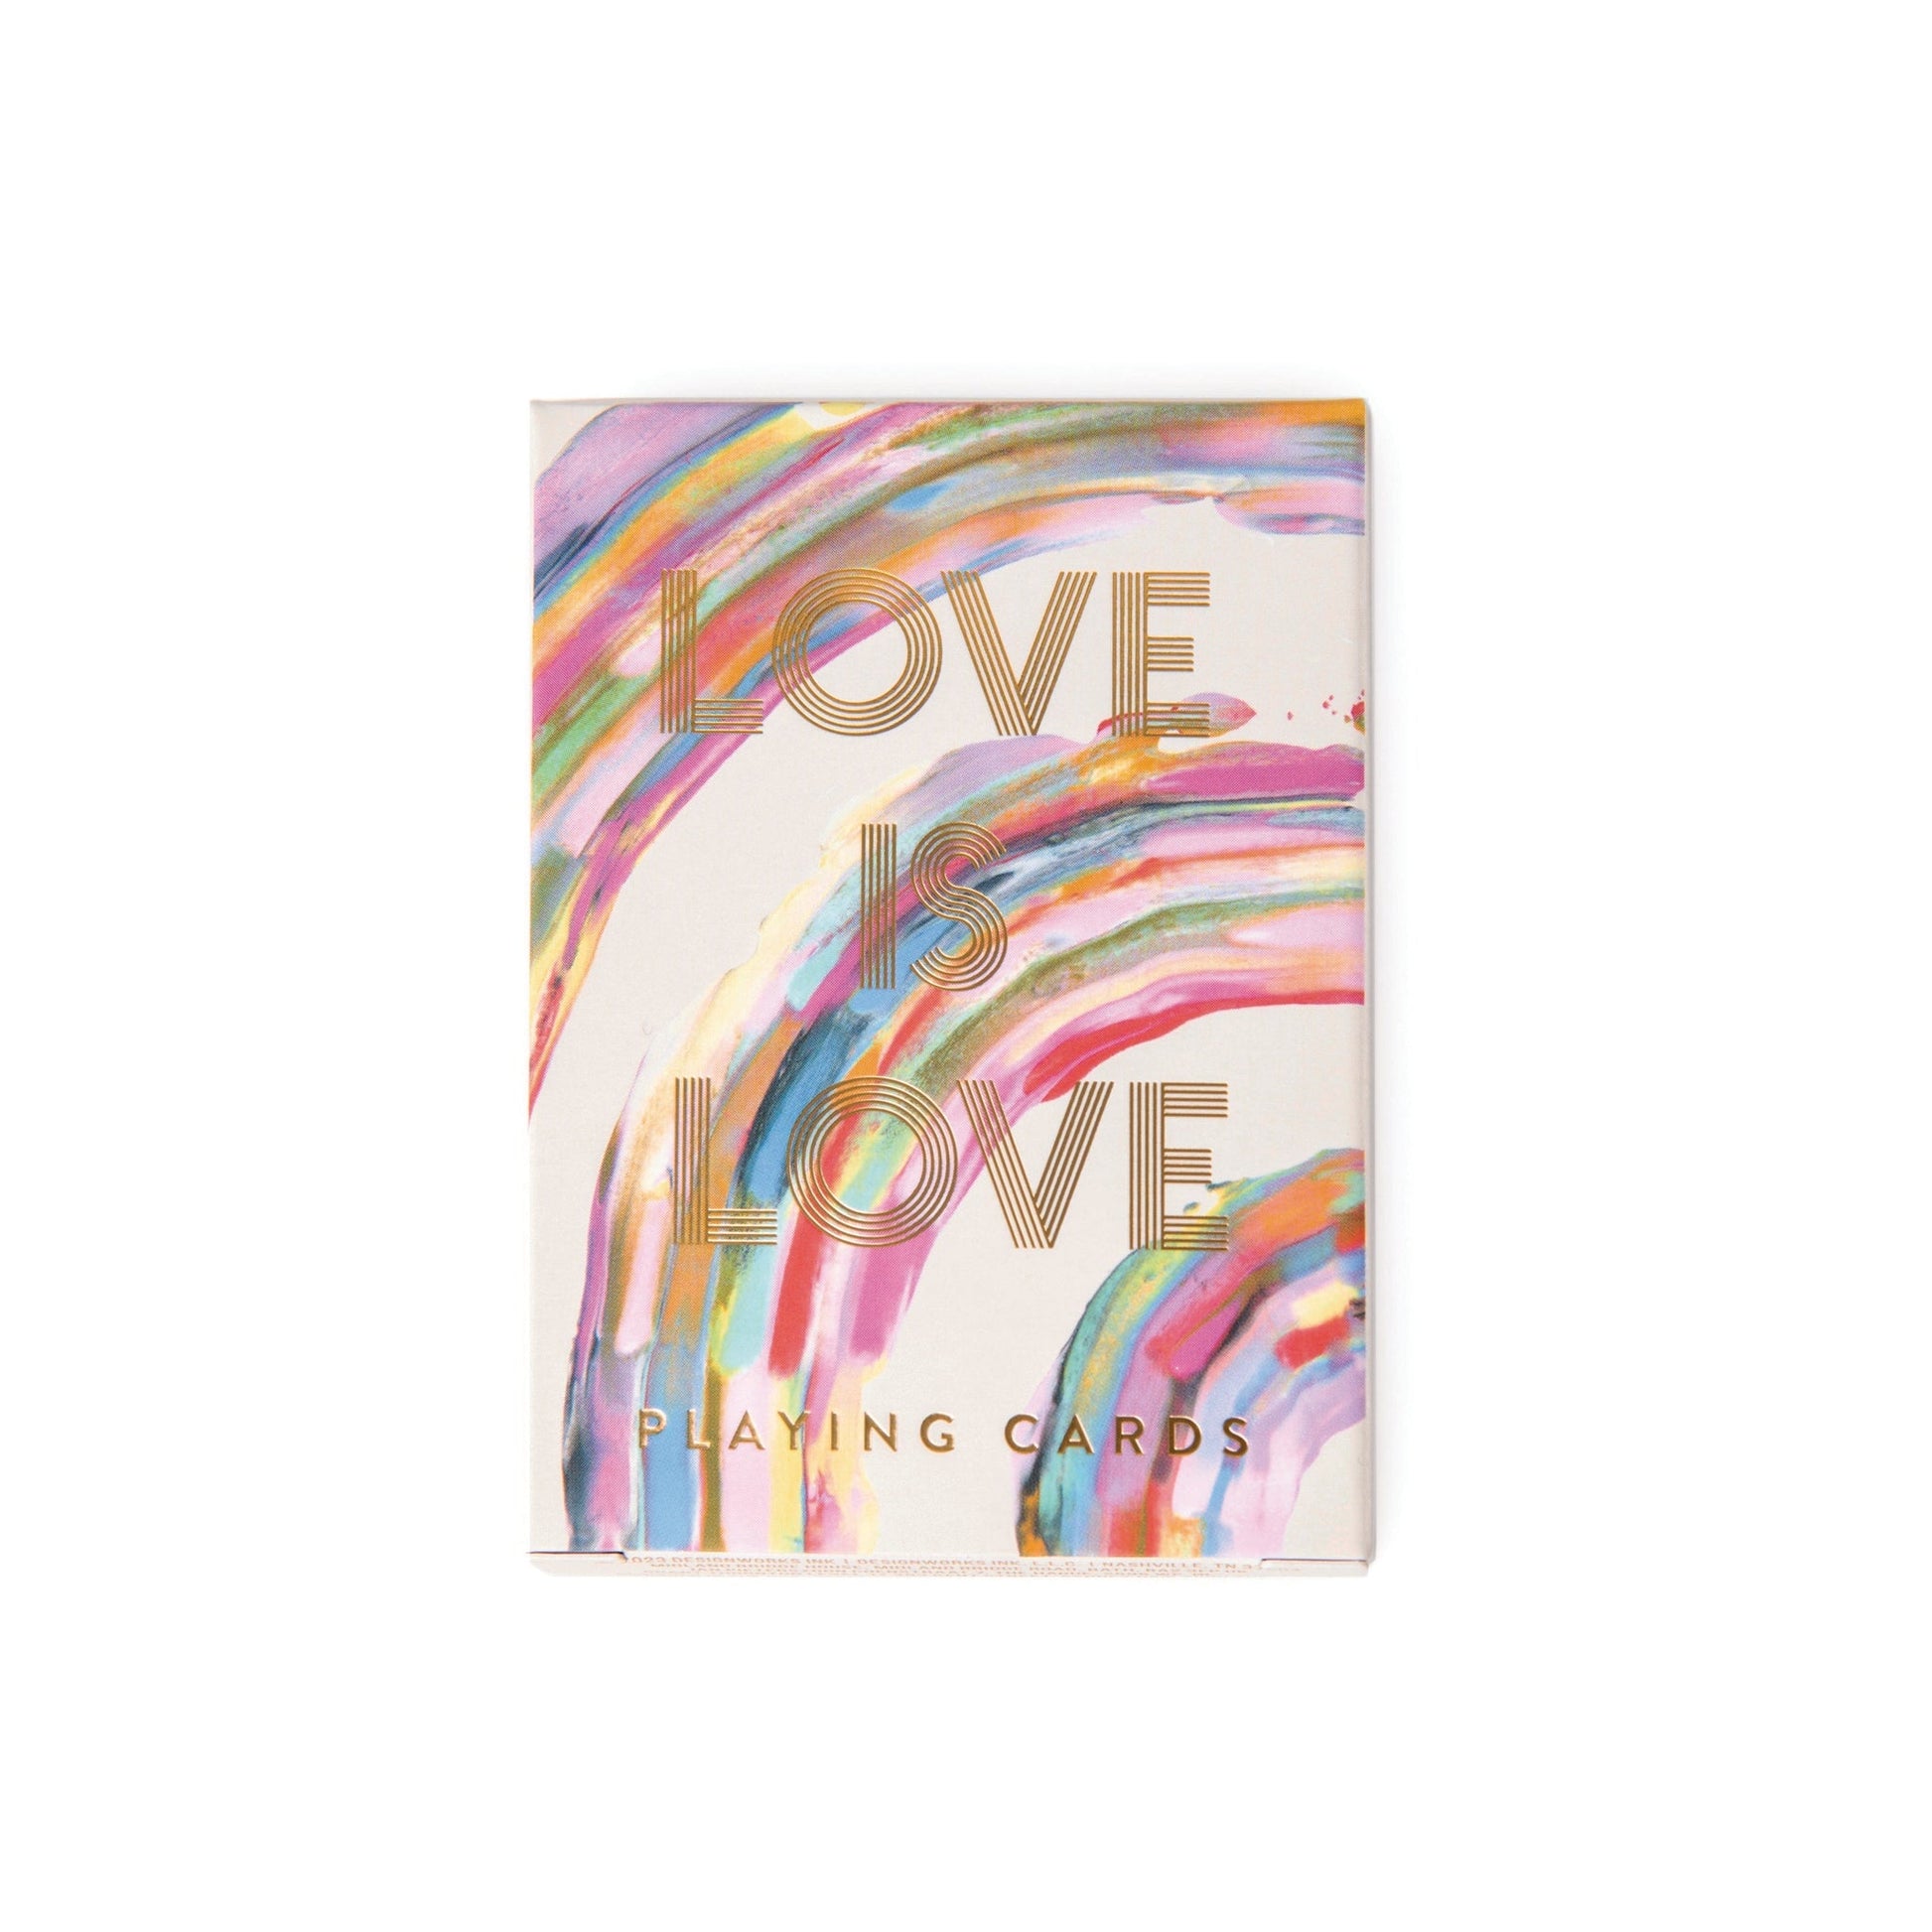 Love Is Love playing cards box with rainbow design and the words Love is Love Playing Cards embossed on whitebackground